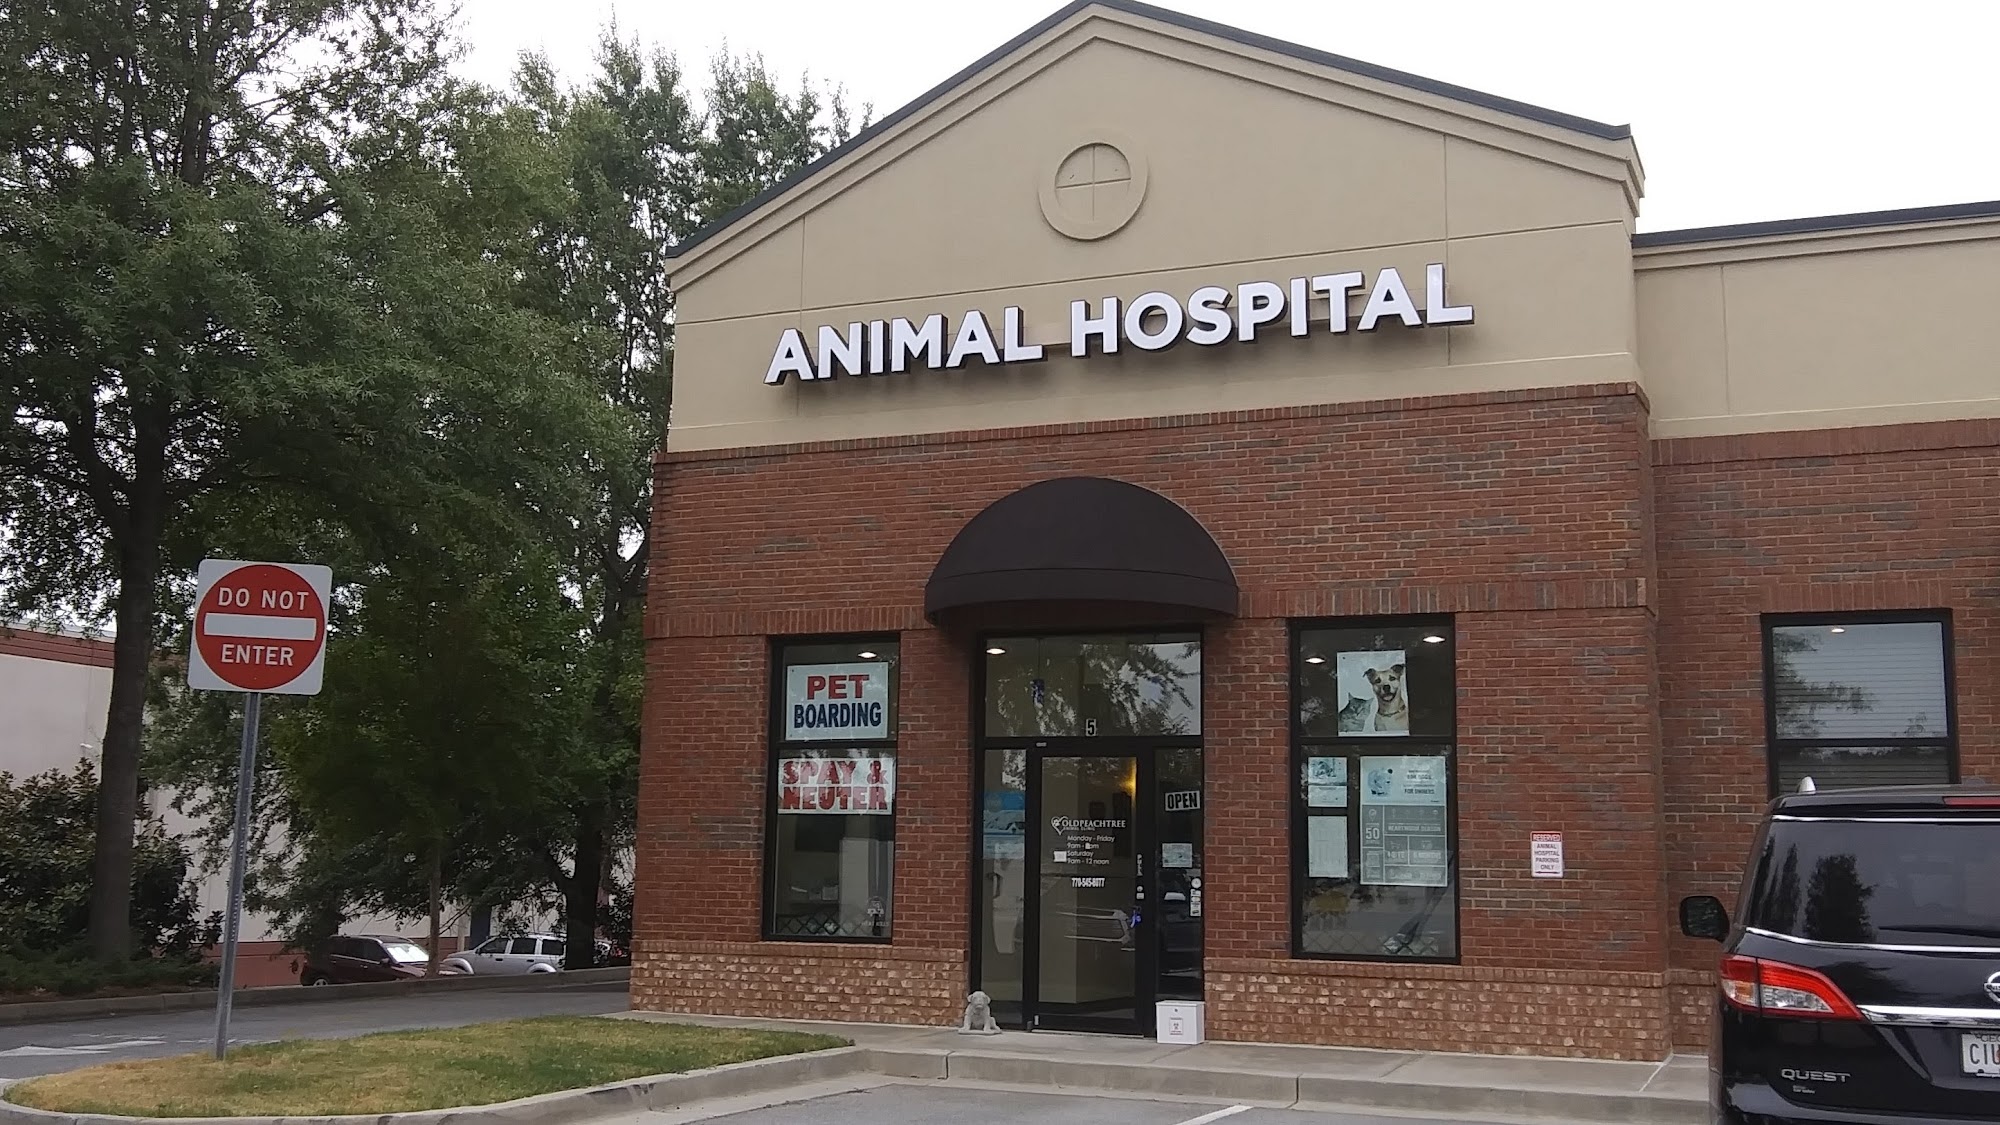 Old Peachtree Animal Clinic